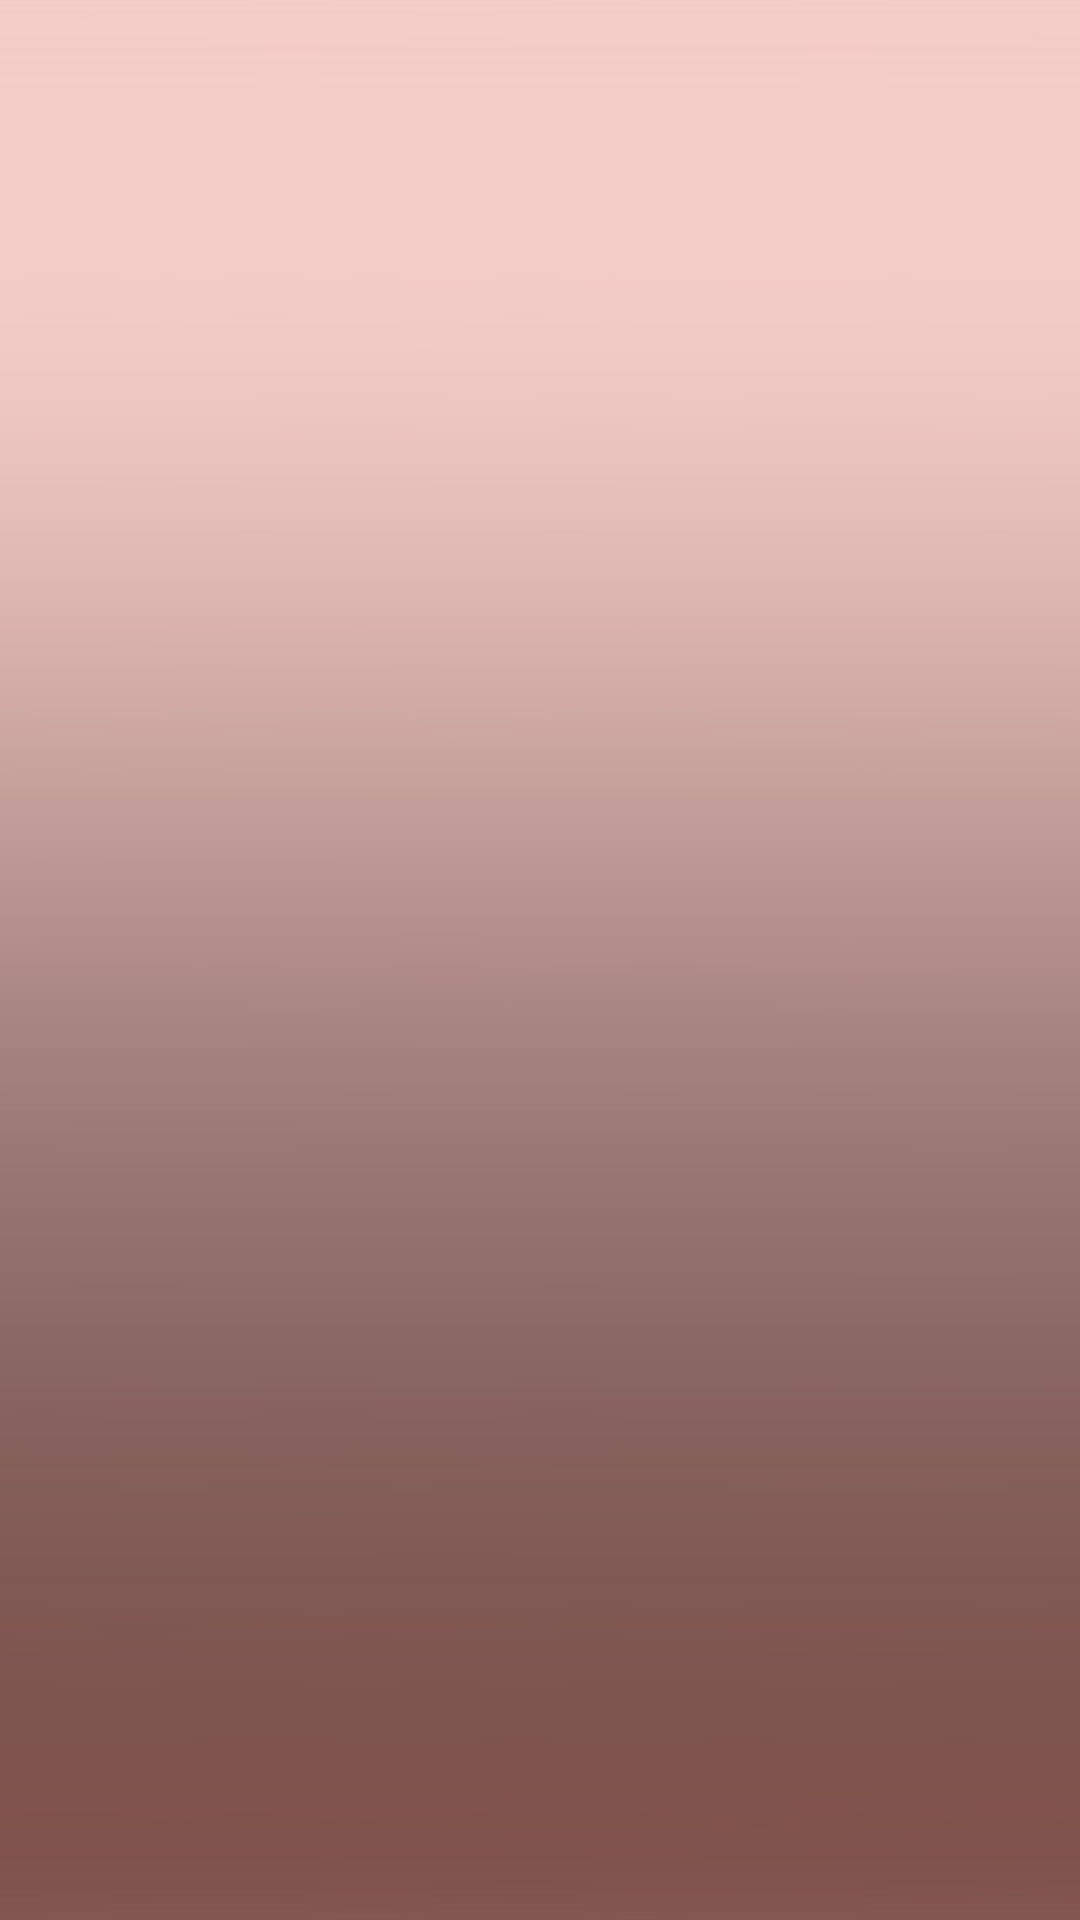 Solid Gradient Rose Gold Iphone Background